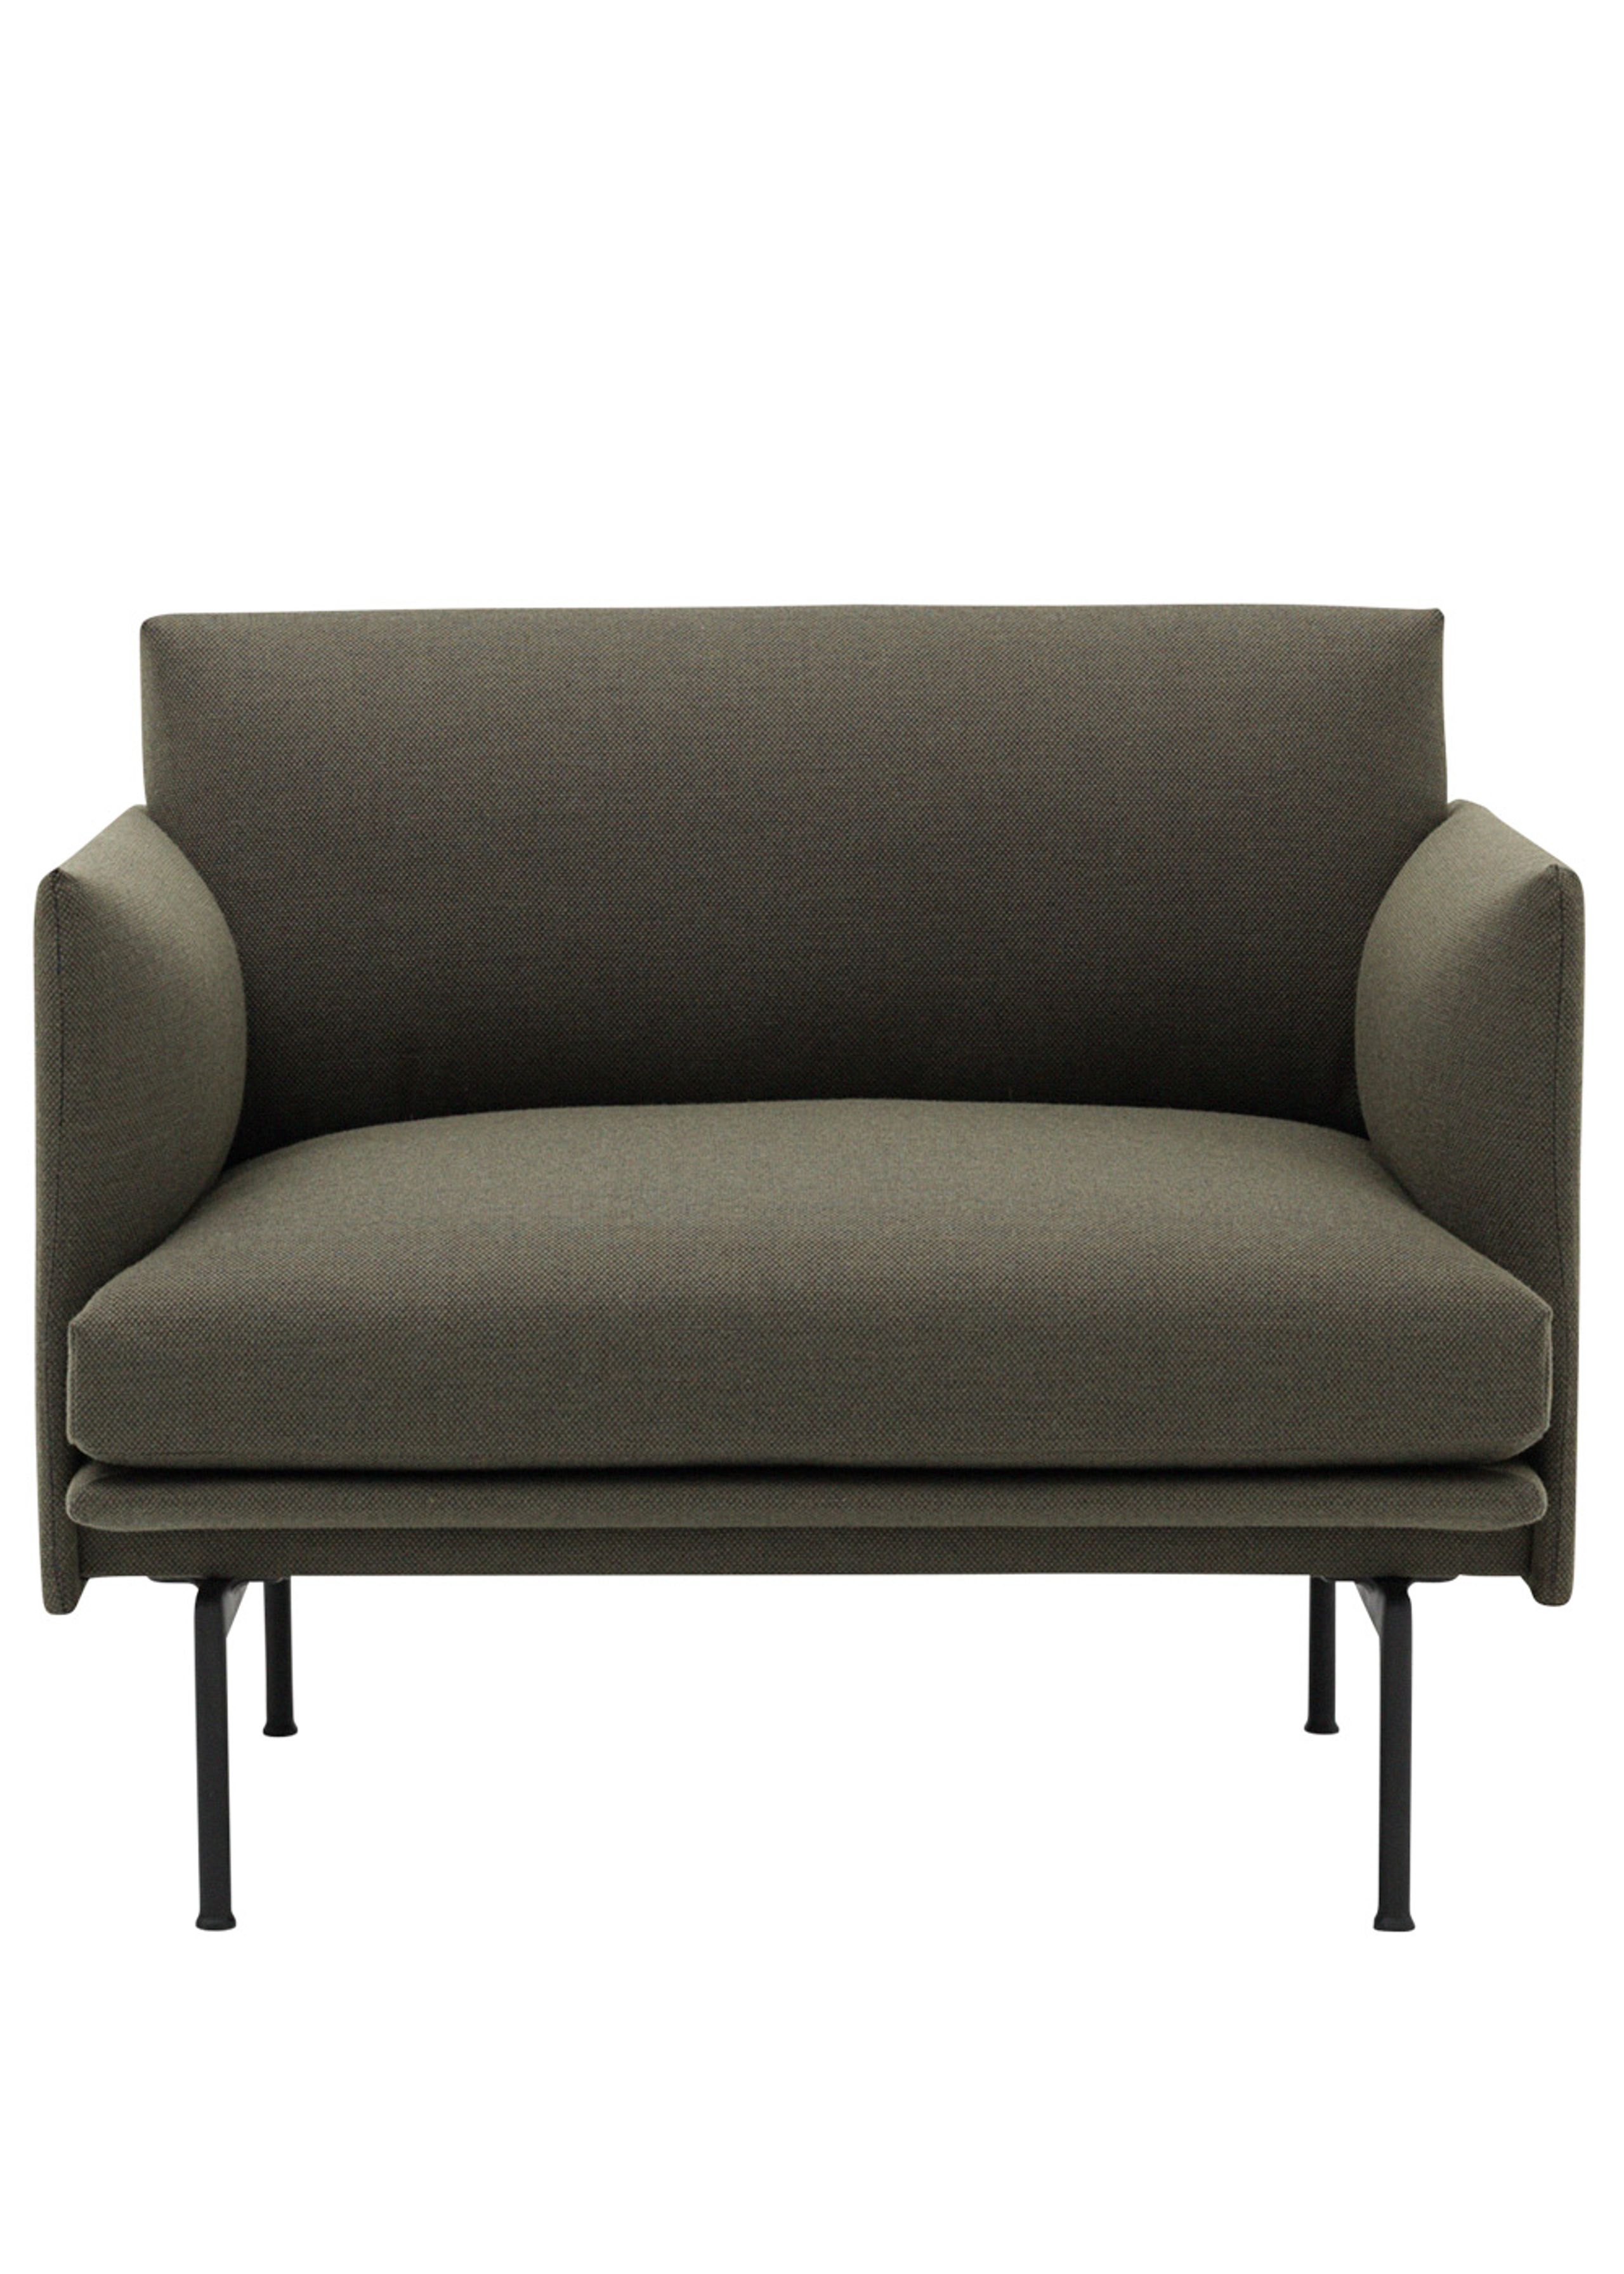 Muuto - Chaise lounge - Outline Chair - Fiord 961